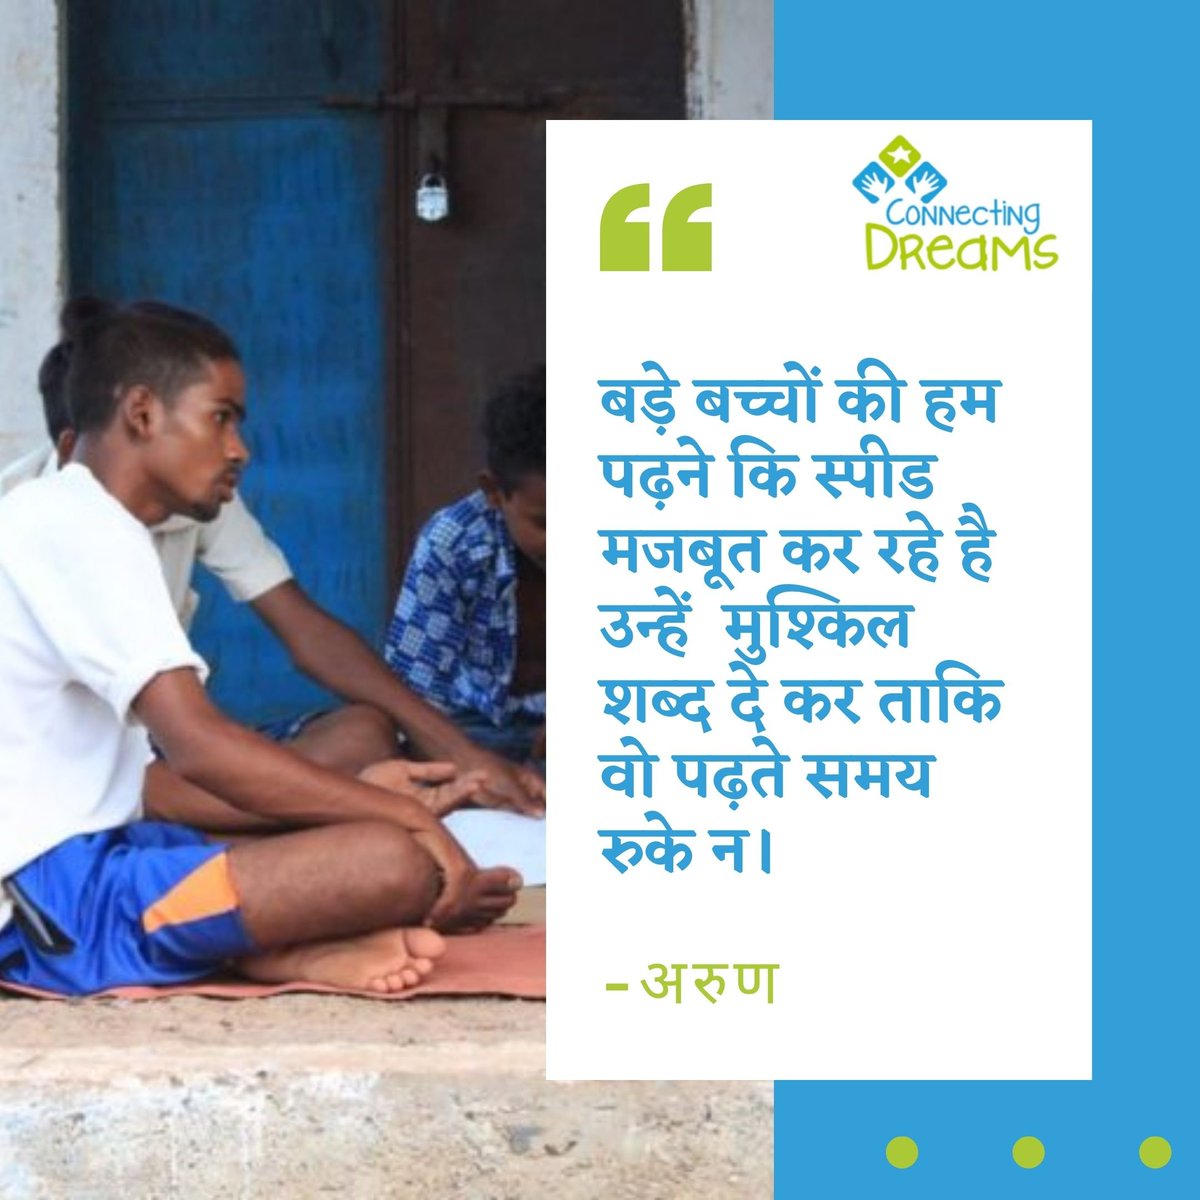 Arun, from Janwaar, Madhya Pradesh has been working on educating children in his town. Arun and his team teach children to learn reading & writing in Hindi 

#cdf #cdfIndia #Changemakers4GramSwarajya #education #GramSwarajya #ruralchangemakers #qualityeducation #SDGs #SDG4